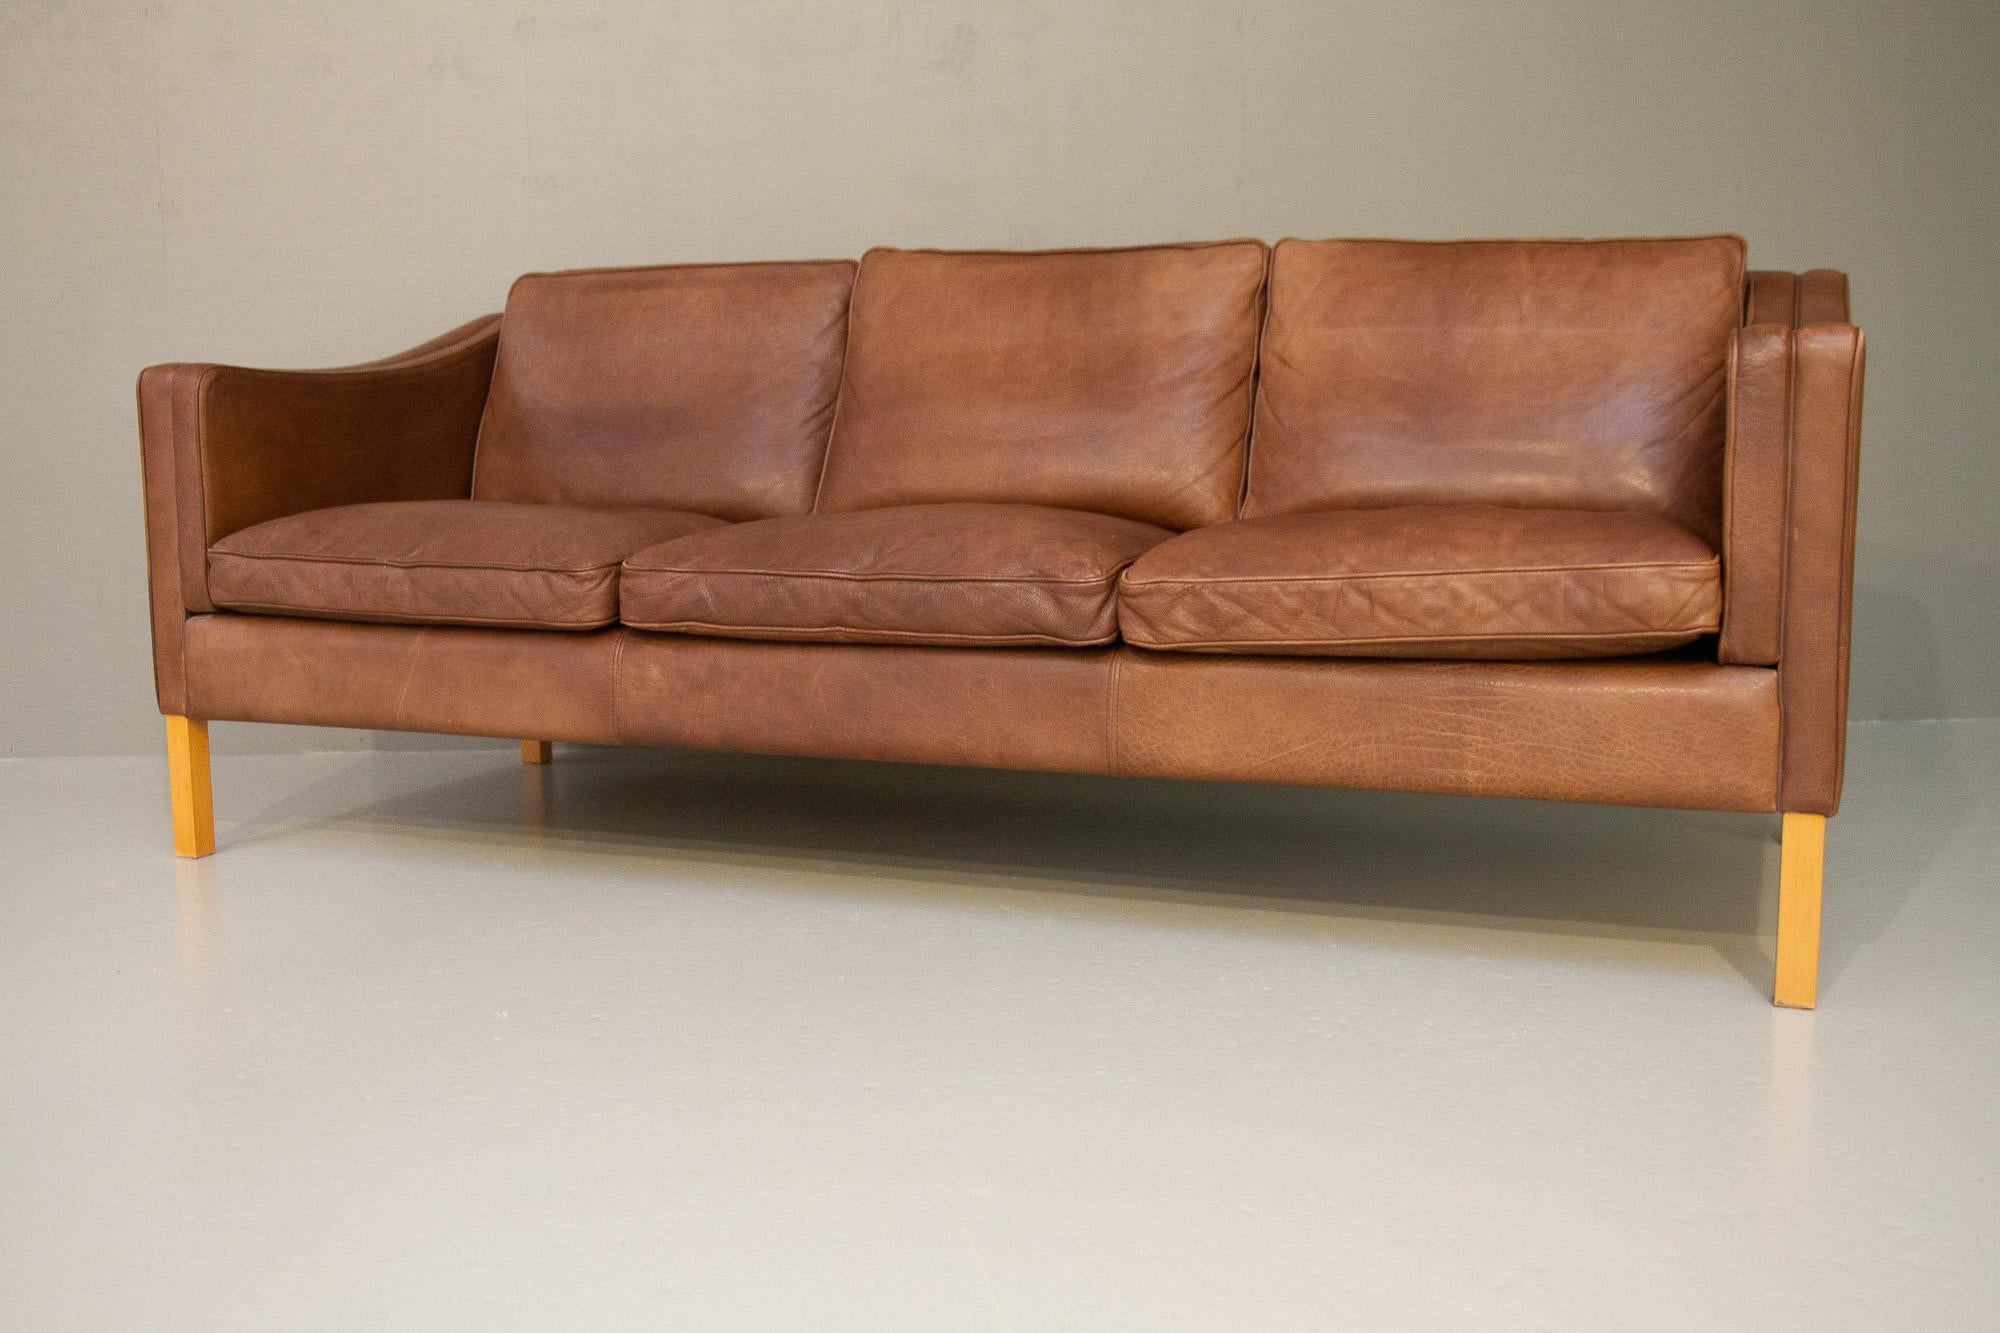 Vintage Danish Leather 3-Seater Sofa by Stouby, 1980s. 14